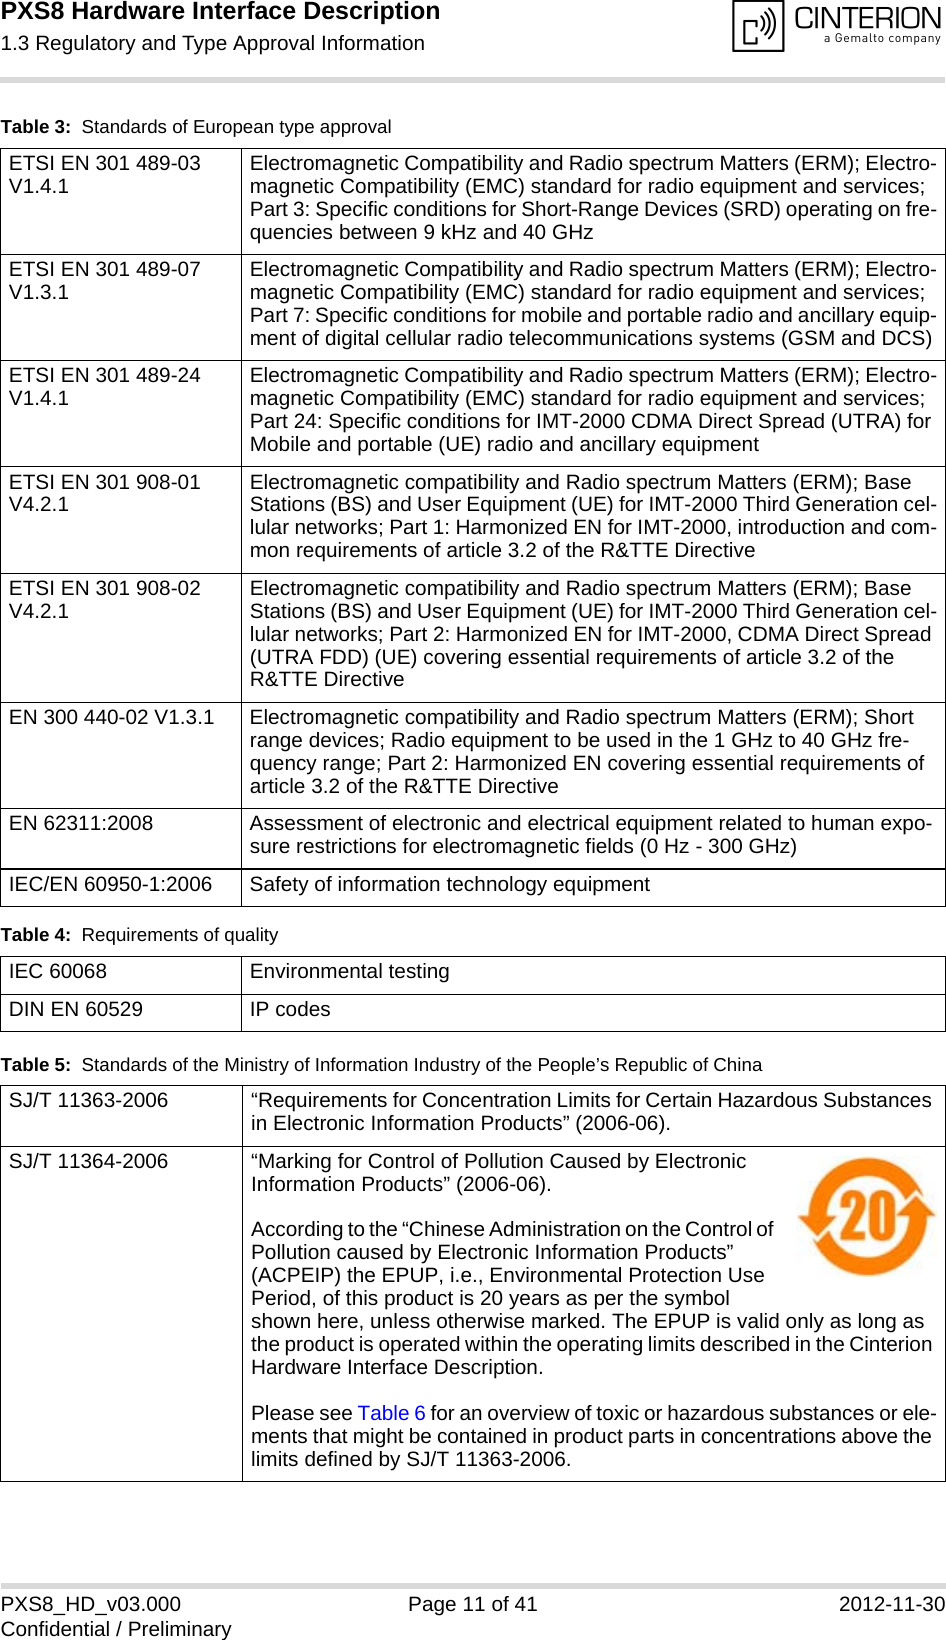 PXS8 Hardware Interface Description1.3 Regulatory and Type Approval Information15PXS8_HD_v03.000 Page 11 of 41 2012-11-30Confidential / PreliminaryETSI EN 301 489-03 V1.4.1 Electromagnetic Compatibility and Radio spectrum Matters (ERM); Electro-magnetic Compatibility (EMC) standard for radio equipment and services; Part 3: Specific conditions for Short-Range Devices (SRD) operating on fre-quencies between 9 kHz and 40 GHz ETSI EN 301 489-07 V1.3.1 Electromagnetic Compatibility and Radio spectrum Matters (ERM); Electro-magnetic Compatibility (EMC) standard for radio equipment and services; Part 7: Specific conditions for mobile and portable radio and ancillary equip-ment of digital cellular radio telecommunications systems (GSM and DCS)ETSI EN 301 489-24 V1.4.1 Electromagnetic Compatibility and Radio spectrum Matters (ERM); Electro-magnetic Compatibility (EMC) standard for radio equipment and services; Part 24: Specific conditions for IMT-2000 CDMA Direct Spread (UTRA) for Mobile and portable (UE) radio and ancillary equipmentETSI EN 301 908-01 V4.2.1 Electromagnetic compatibility and Radio spectrum Matters (ERM); Base Stations (BS) and User Equipment (UE) for IMT-2000 Third Generation cel-lular networks; Part 1: Harmonized EN for IMT-2000, introduction and com-mon requirements of article 3.2 of the R&amp;TTE DirectiveETSI EN 301 908-02 V4.2.1 Electromagnetic compatibility and Radio spectrum Matters (ERM); Base Stations (BS) and User Equipment (UE) for IMT-2000 Third Generation cel-lular networks; Part 2: Harmonized EN for IMT-2000, CDMA Direct Spread (UTRA FDD) (UE) covering essential requirements of article 3.2 of the R&amp;TTE DirectiveEN 300 440-02 V1.3.1  Electromagnetic compatibility and Radio spectrum Matters (ERM); Short range devices; Radio equipment to be used in the 1 GHz to 40 GHz fre-quency range; Part 2: Harmonized EN covering essential requirements of article 3.2 of the R&amp;TTE Directive EN 62311:2008 Assessment of electronic and electrical equipment related to human expo-sure restrictions for electromagnetic fields (0 Hz - 300 GHz)IEC/EN 60950-1:2006 Safety of information technology equipmentTable 4:  Requirements of qualityIEC 60068 Environmental testingDIN EN 60529 IP codesTable 5:  Standards of the Ministry of Information Industry of the People’s Republic of ChinaSJ/T 11363-2006  “Requirements for Concentration Limits for Certain Hazardous Substances in Electronic Information Products” (2006-06).SJ/T 11364-2006 “Marking for Control of Pollution Caused by Electronic Information Products” (2006-06).According to the “Chinese Administration on the Control of Pollution caused by Electronic Information Products” (ACPEIP) the EPUP, i.e., Environmental Protection Use Period, of this product is 20 years as per the symbol shown here, unless otherwise marked. The EPUP is valid only as long as the product is operated within the operating limits described in the Cinterion Hardware Interface Description.Please see Table 6 for an overview of toxic or hazardous substances or ele-ments that might be contained in product parts in concentrations above the limits defined by SJ/T 11363-2006. Table 3:  Standards of European type approval